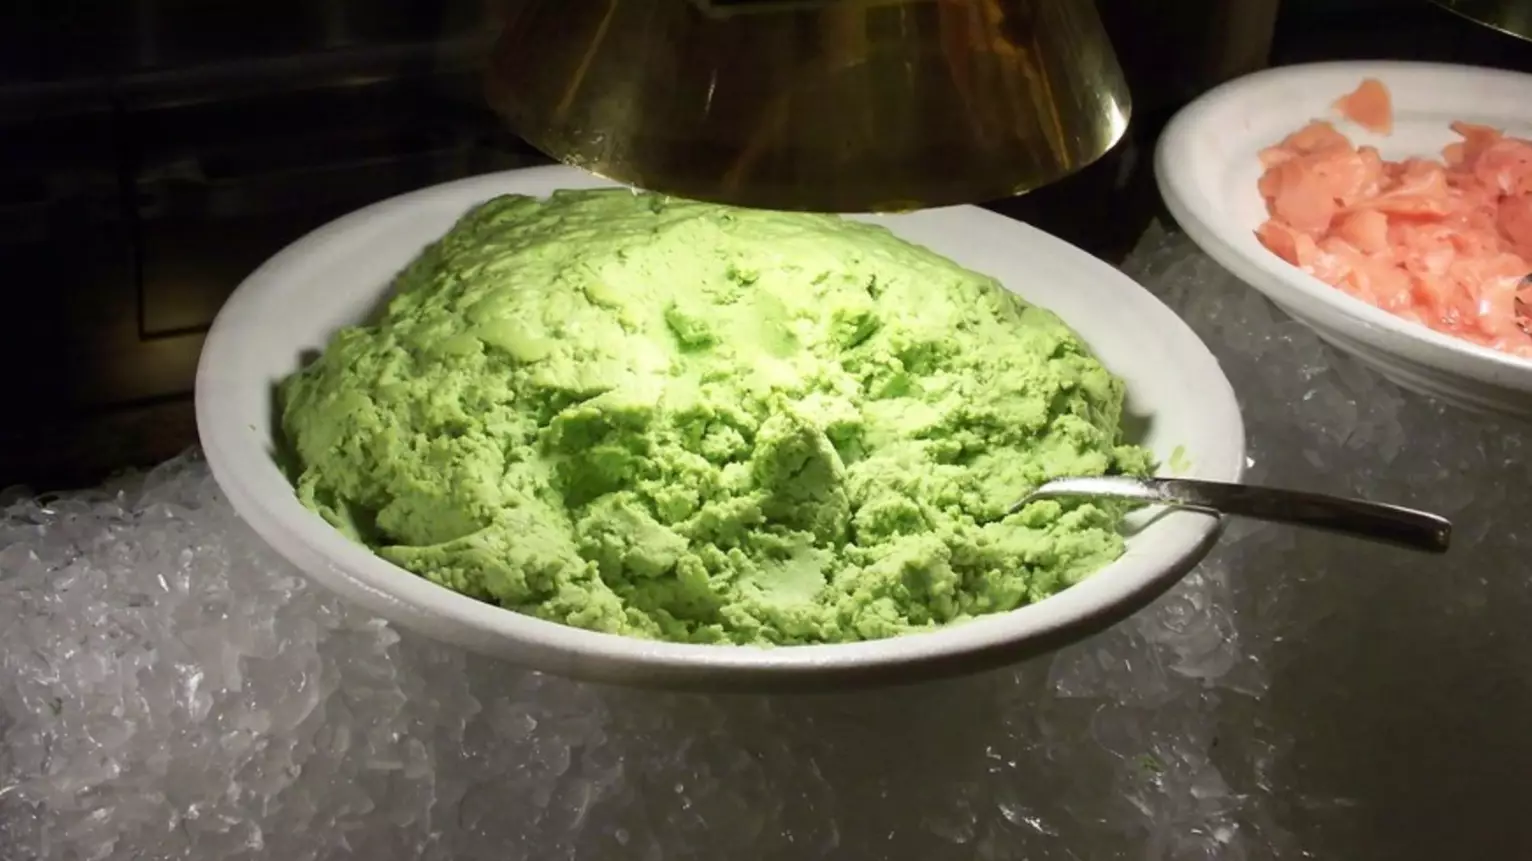 Woman Sent To Hospital After Eating 'Large Amount Of Wasabi' She Thought Was Avocado